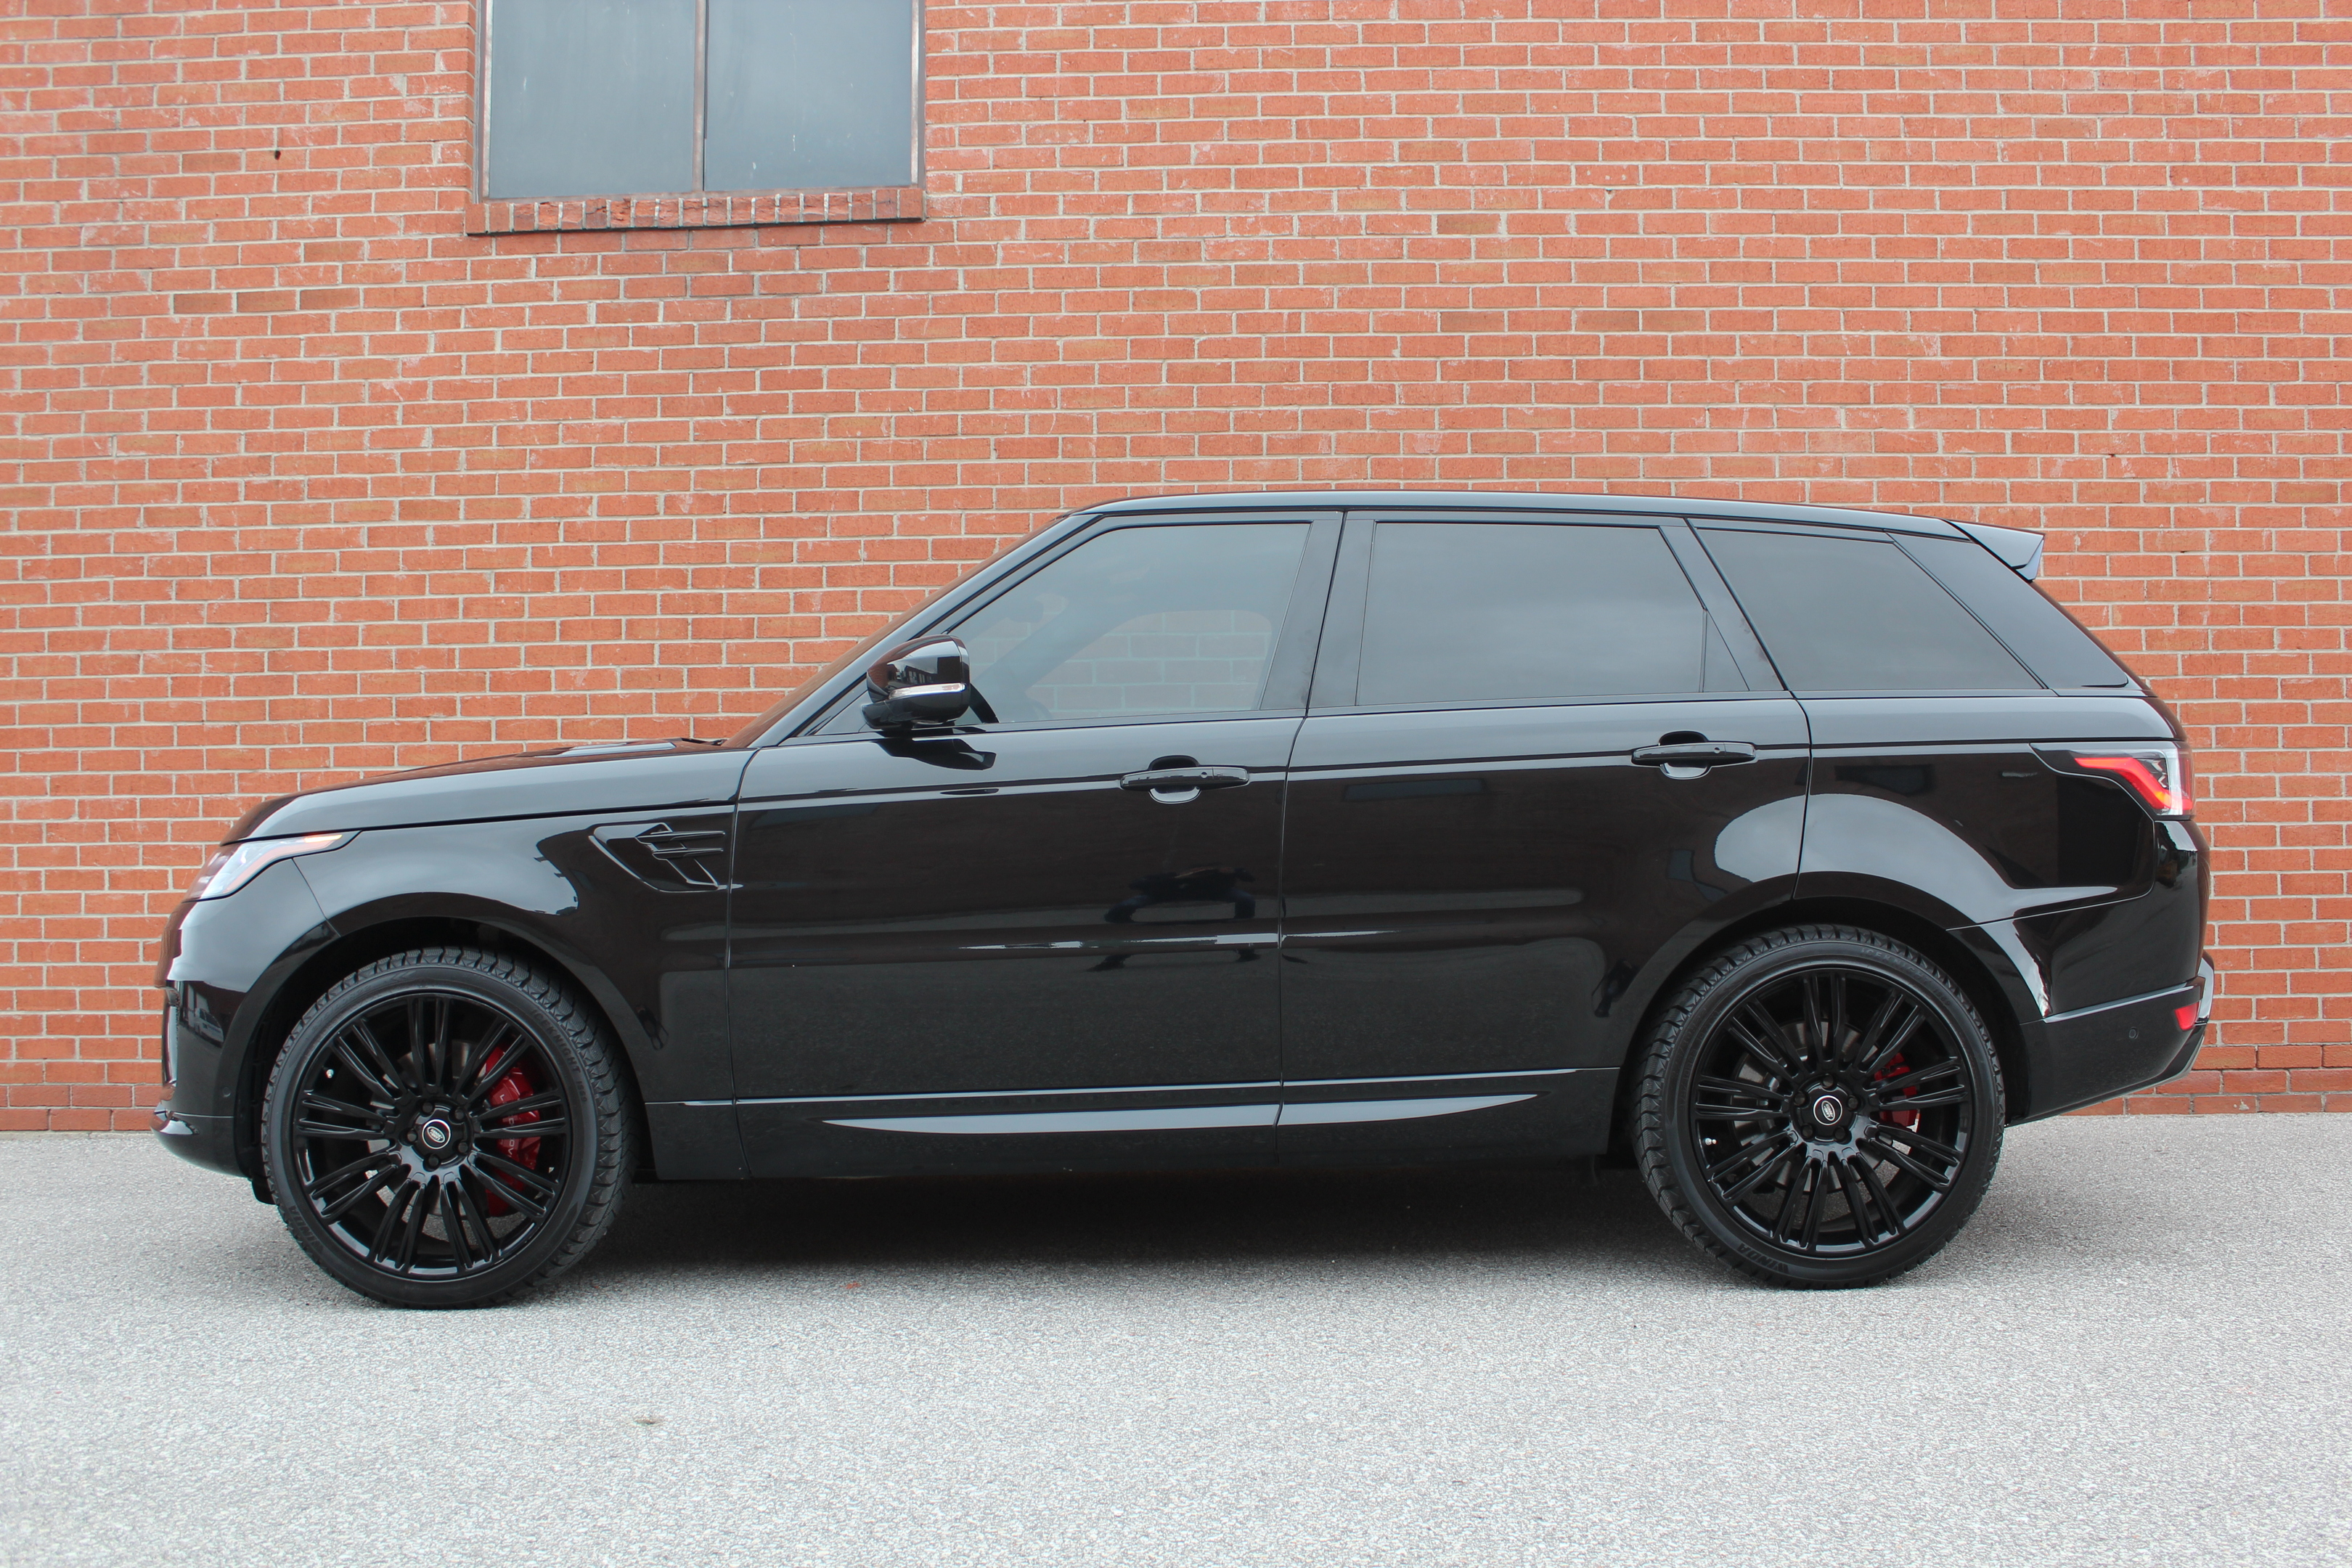 2019 Land Rover Range Rover Sport "HST EDITION" - "BLACK ON RED"